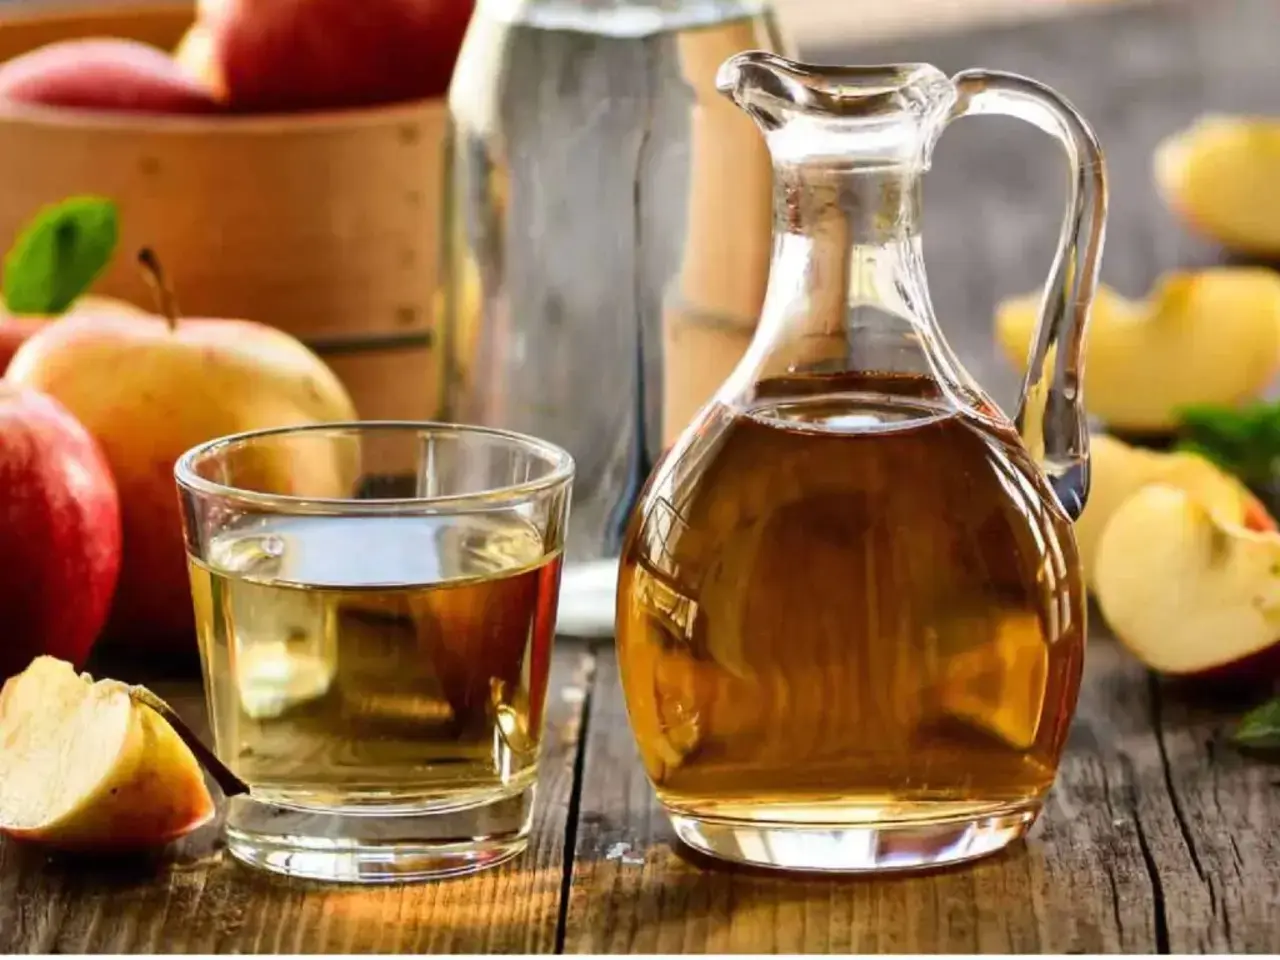 Here’s what happens if you drink apple cider vinegar before bed